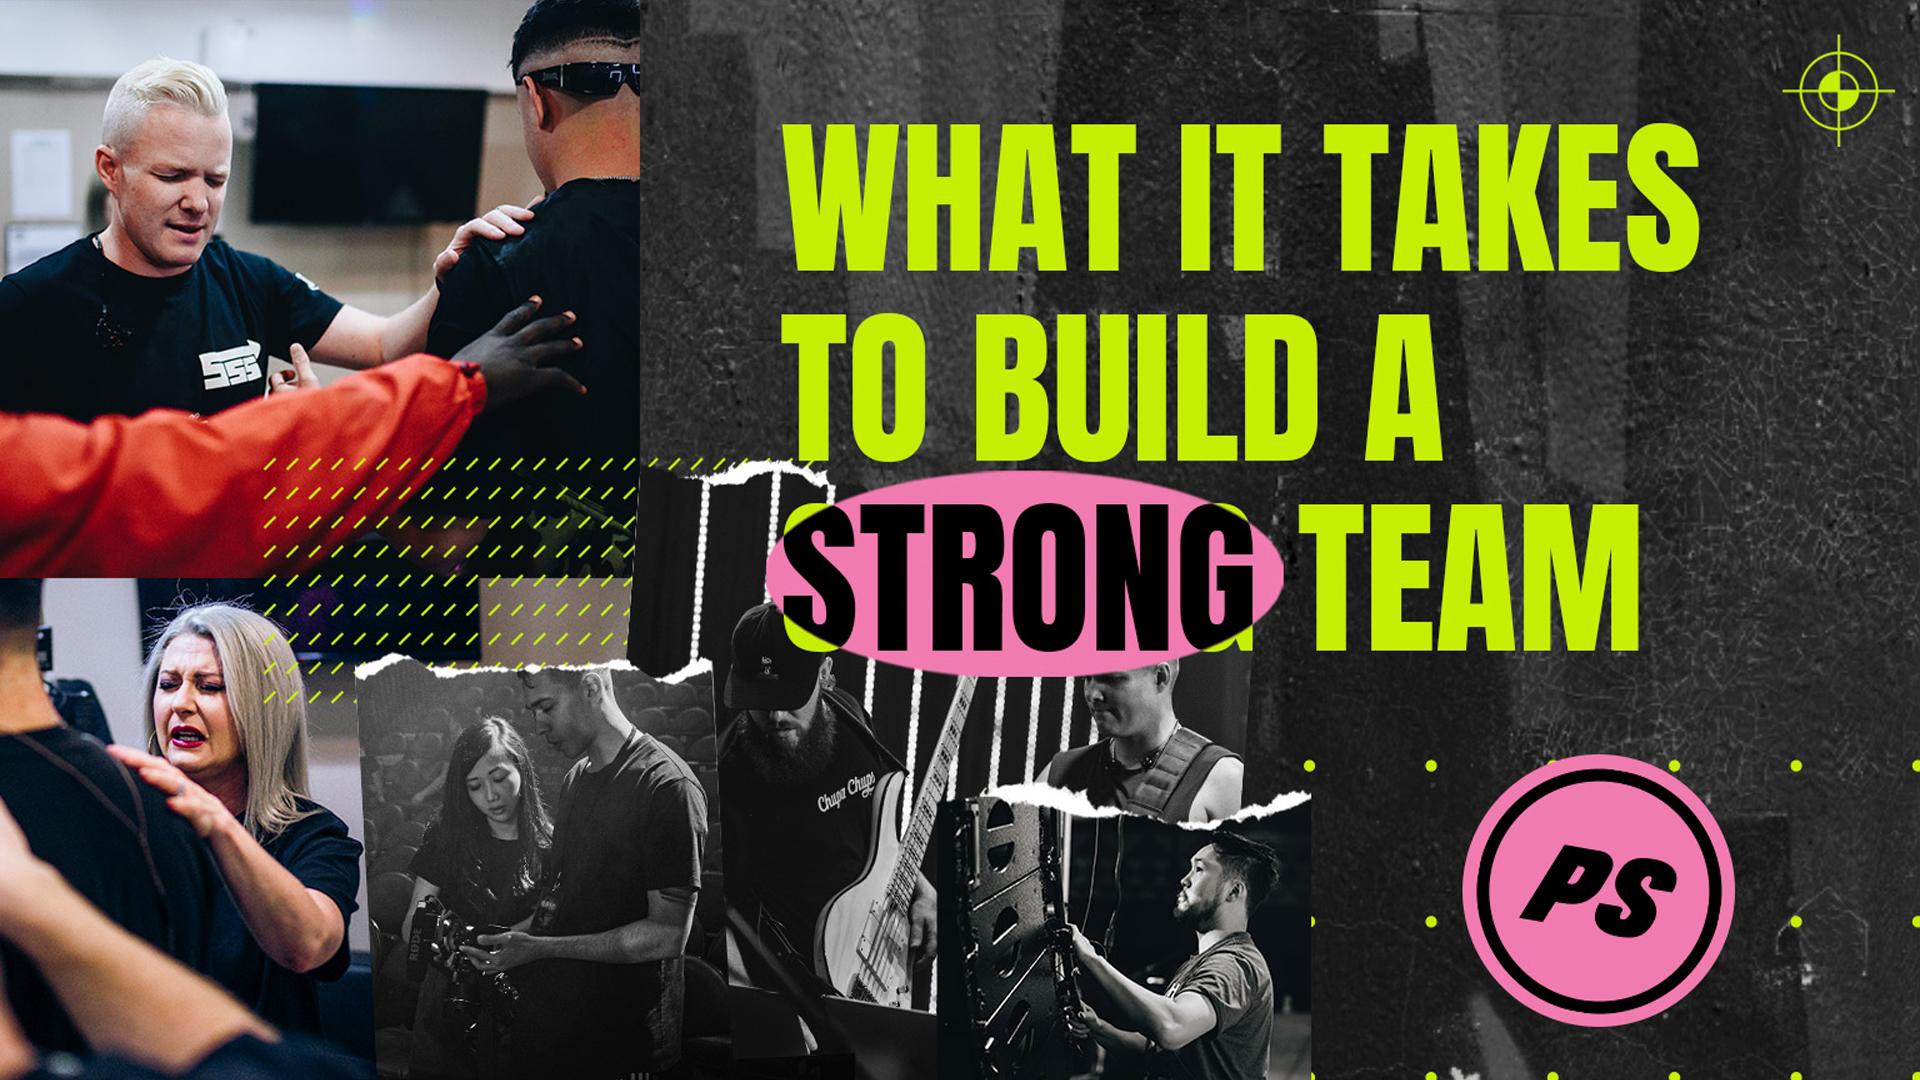 Featured Image for “What it Takes to Build a Strong Team”